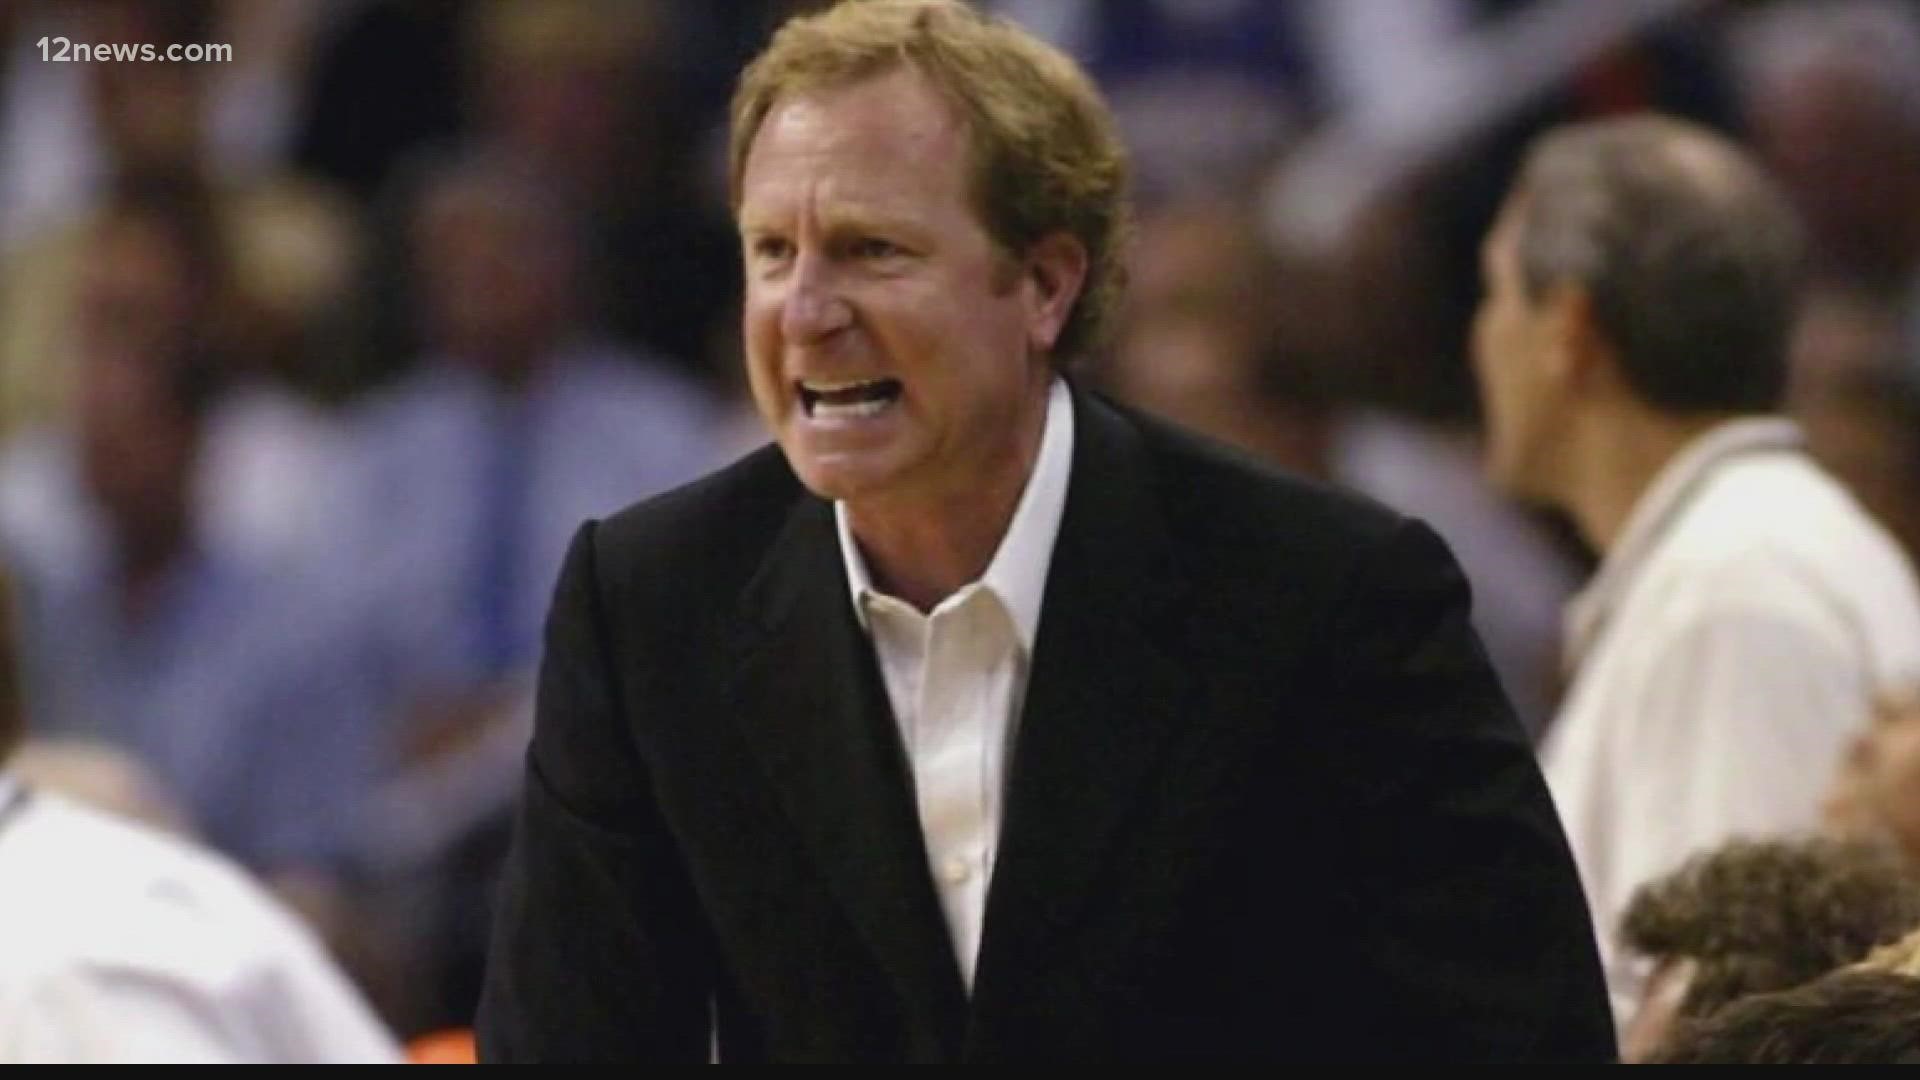 ESPN has finally released an exclusive report filled with allegations of racism and misogyny from Phoenix Suns owner Robert Sarver.